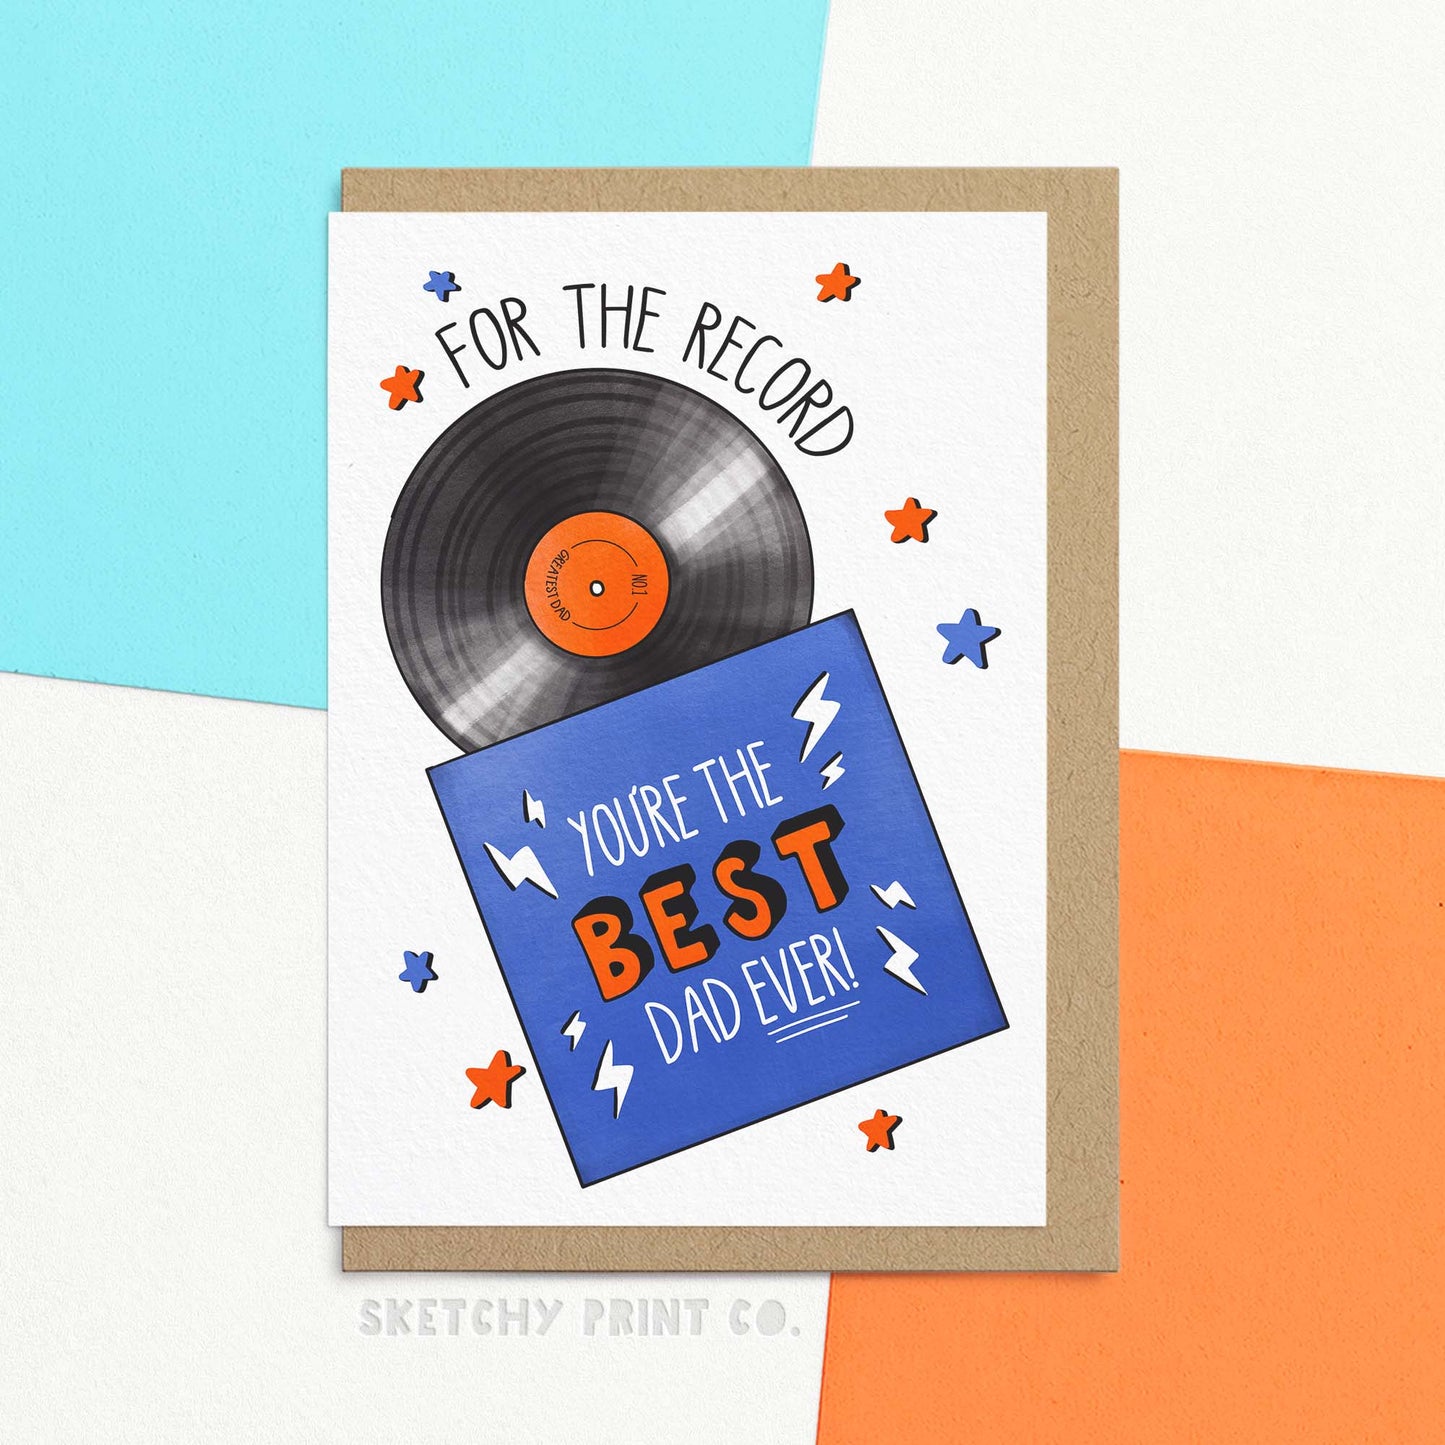 Whether it's a funny father's day card or happy birthday greetings to pair with your cool gift for Dad this card has you covered. Card reading 'for the record, you're the best dad ever!'